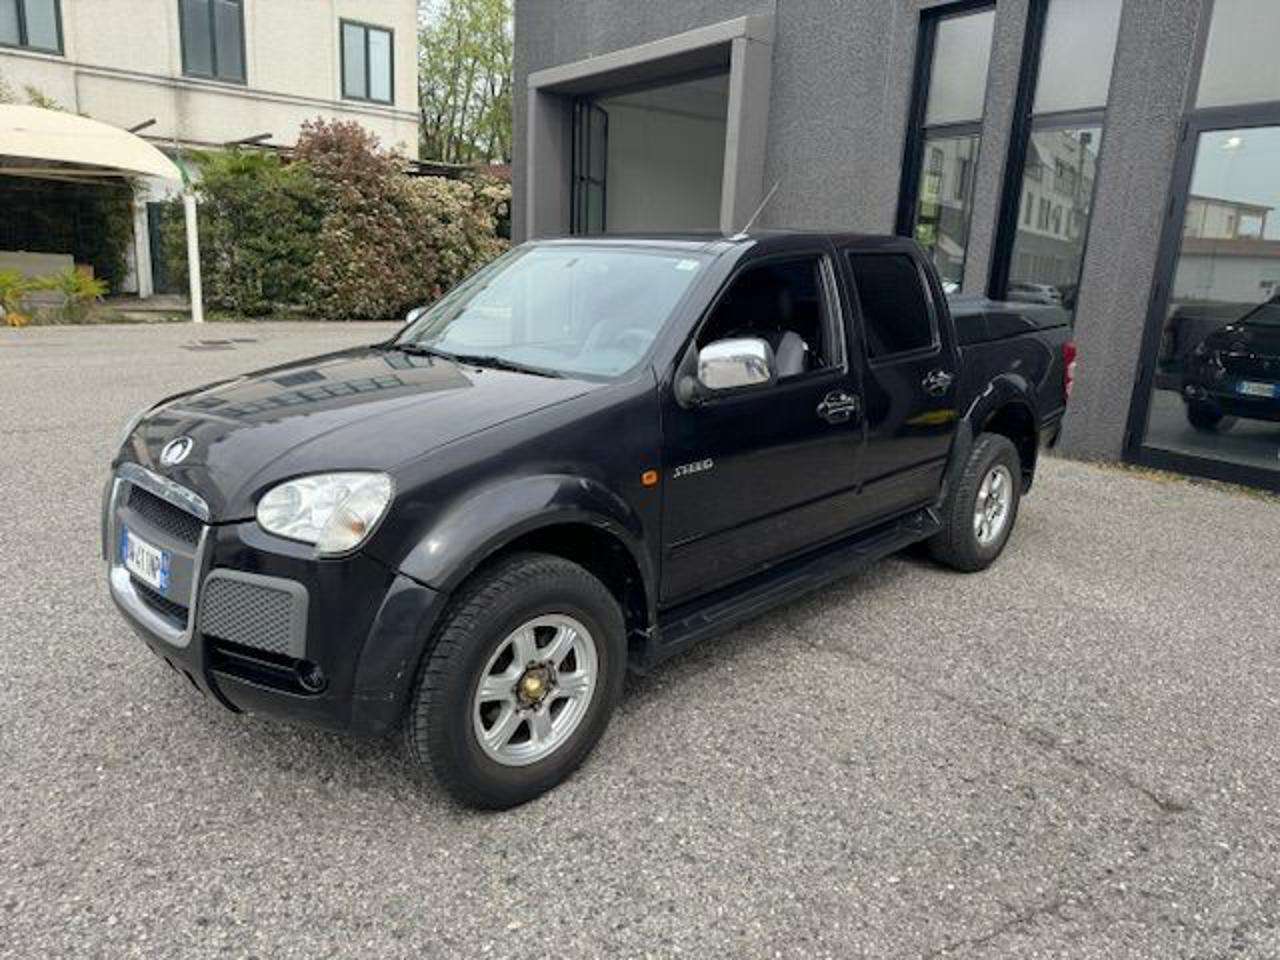 Great Wall Steed DC 2.4 Super Luxury